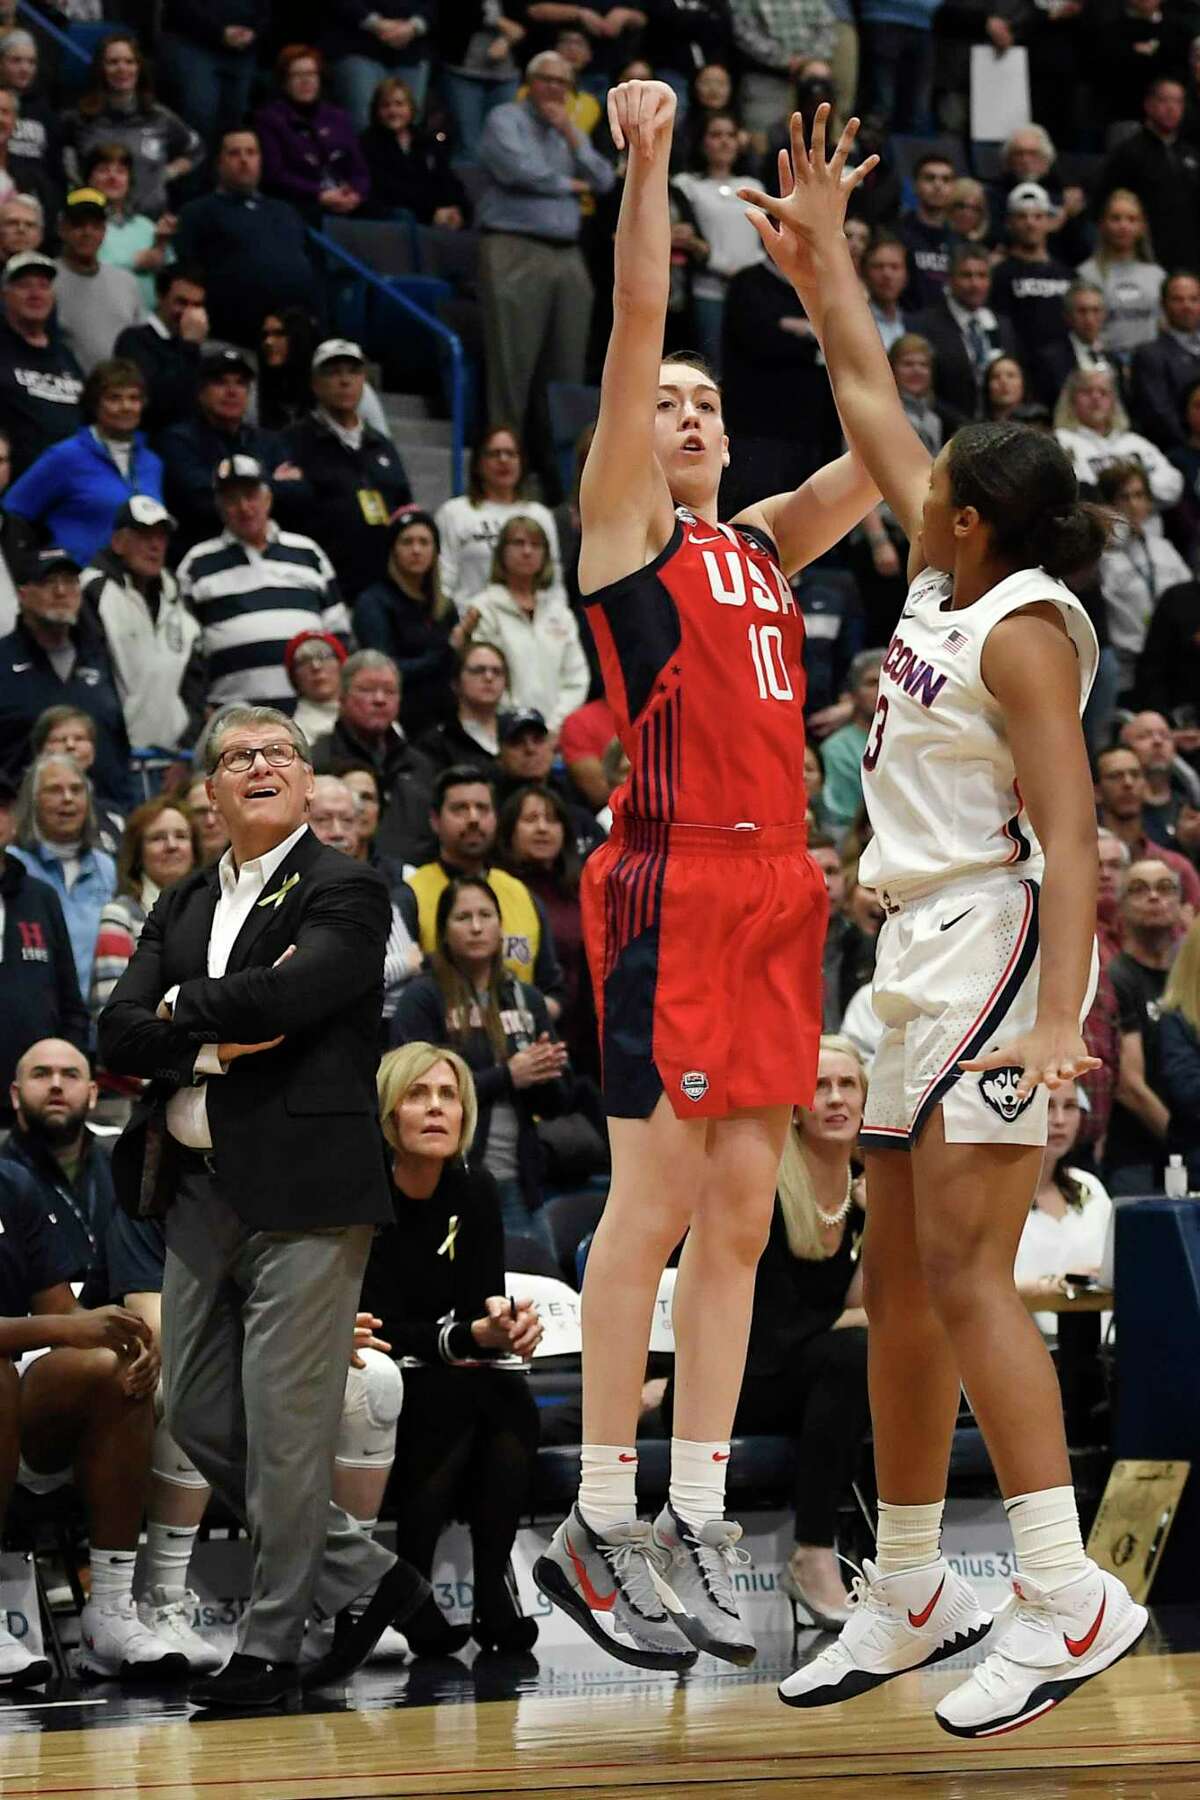 Connecticut head coach Geno Auriemma watches a shot attempt by United States' Breanna Stewart, center, as Connecticut's Megan Walker, right, defends, in the first half of an exhibition basketball game, Monday, Jan. 27, 2020, in Hartford, Conn. (AP Photo/Jessica Hill)